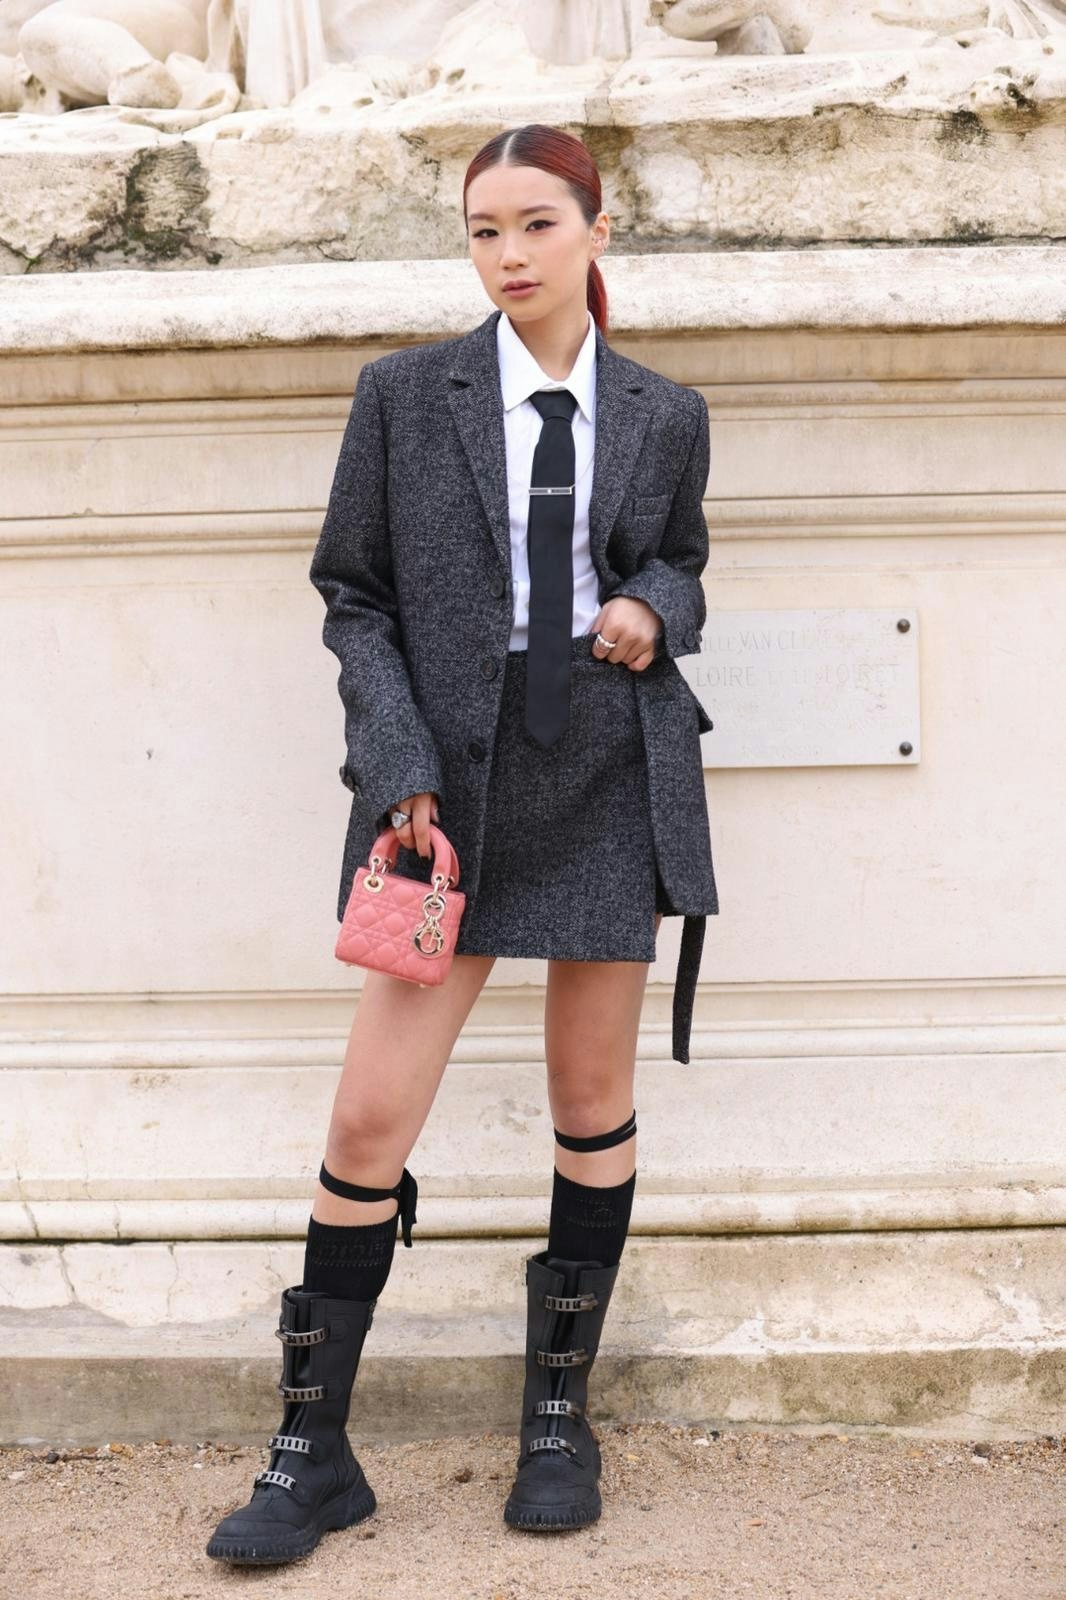 Blogger 努力 Nuria attends the Dior show dressed in a full look by the brand. Photo: Enrique URRUTIA